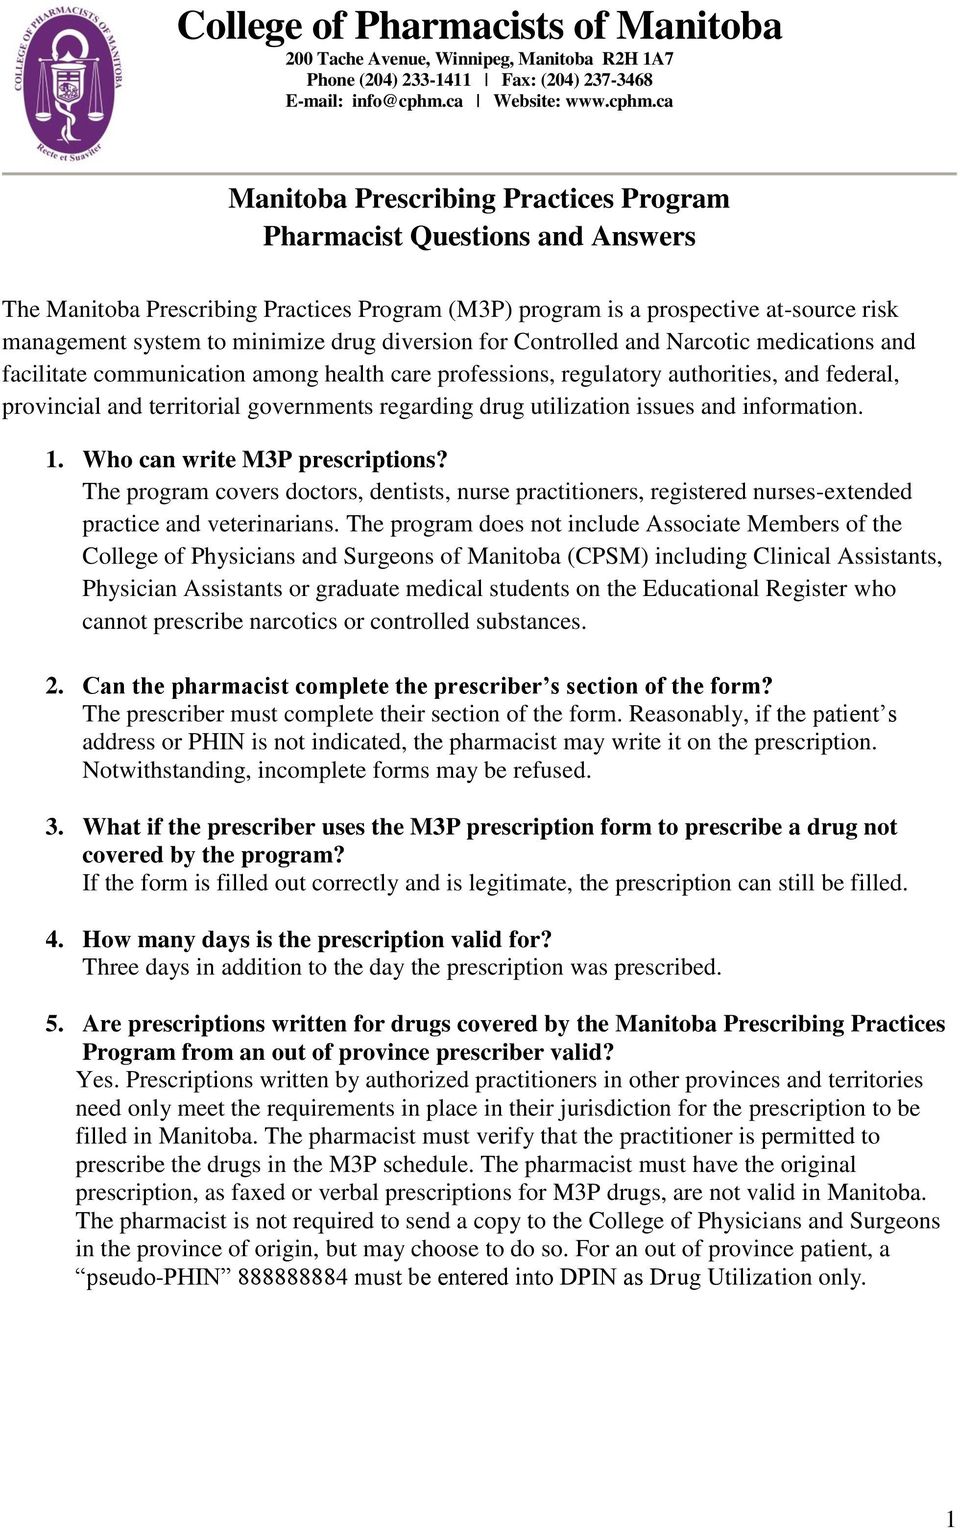 ca Manitoba Prescribing Practices Program Pharmacist Questions and Answers The Manitoba Prescribing Practices Program (M3P) program is a prospective at-source risk management system to minimize drug